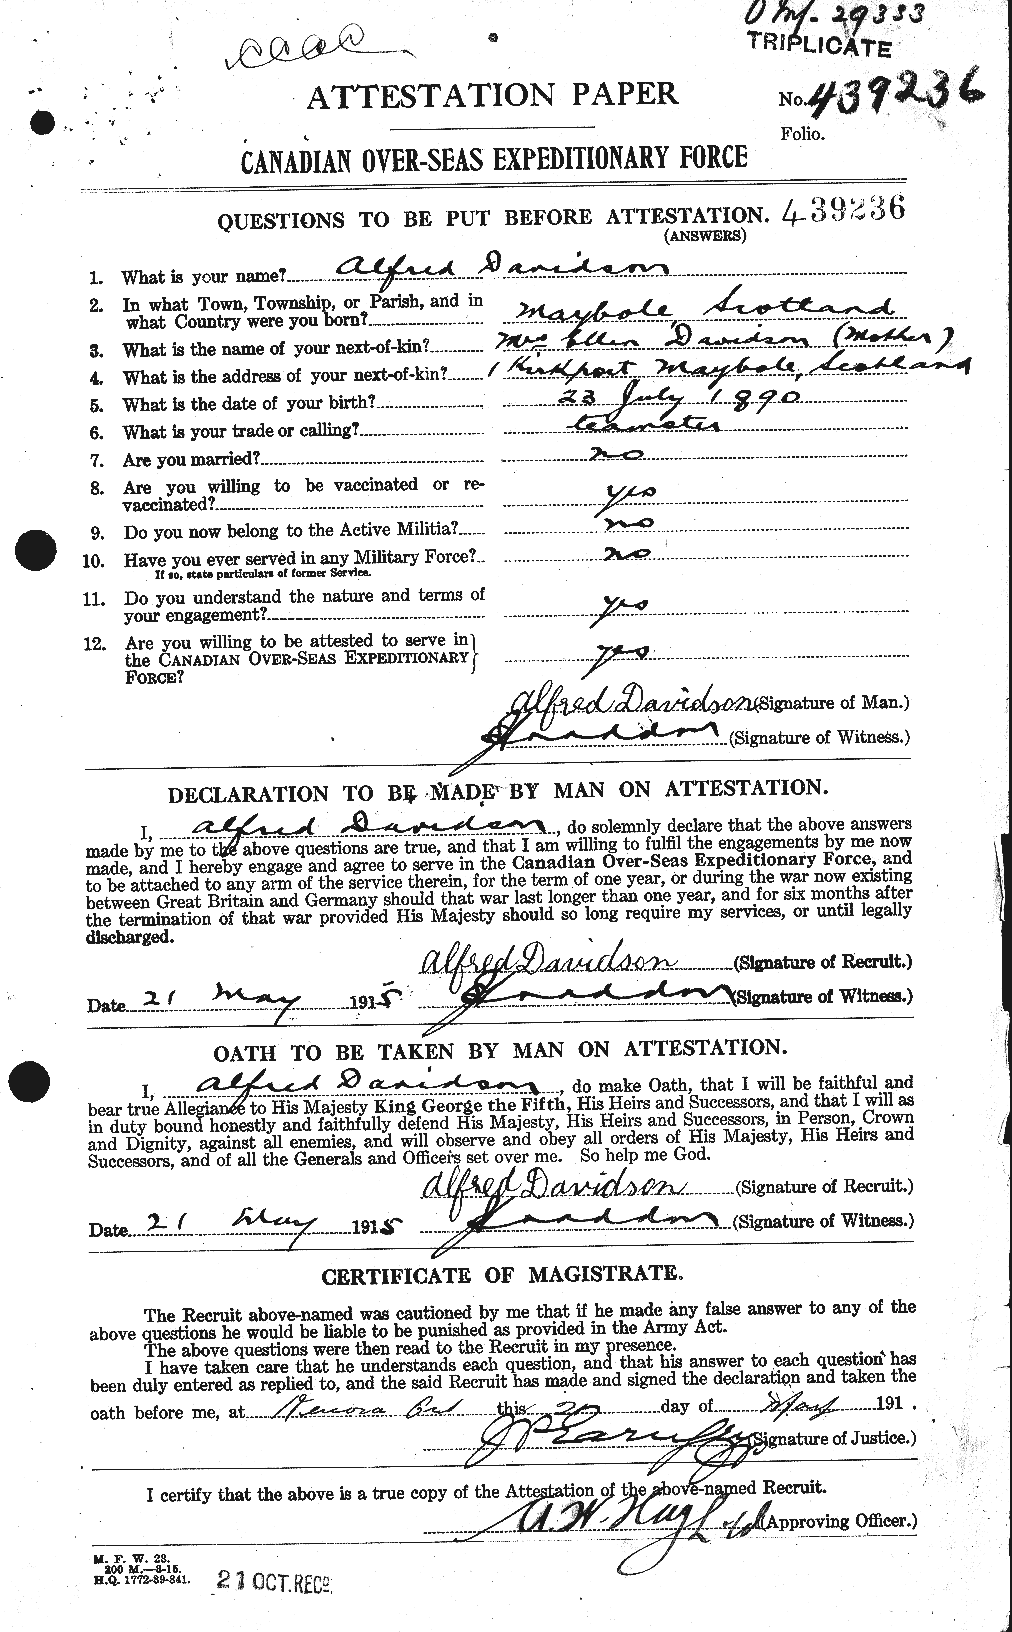 Personnel Records of the First World War - CEF 280729a